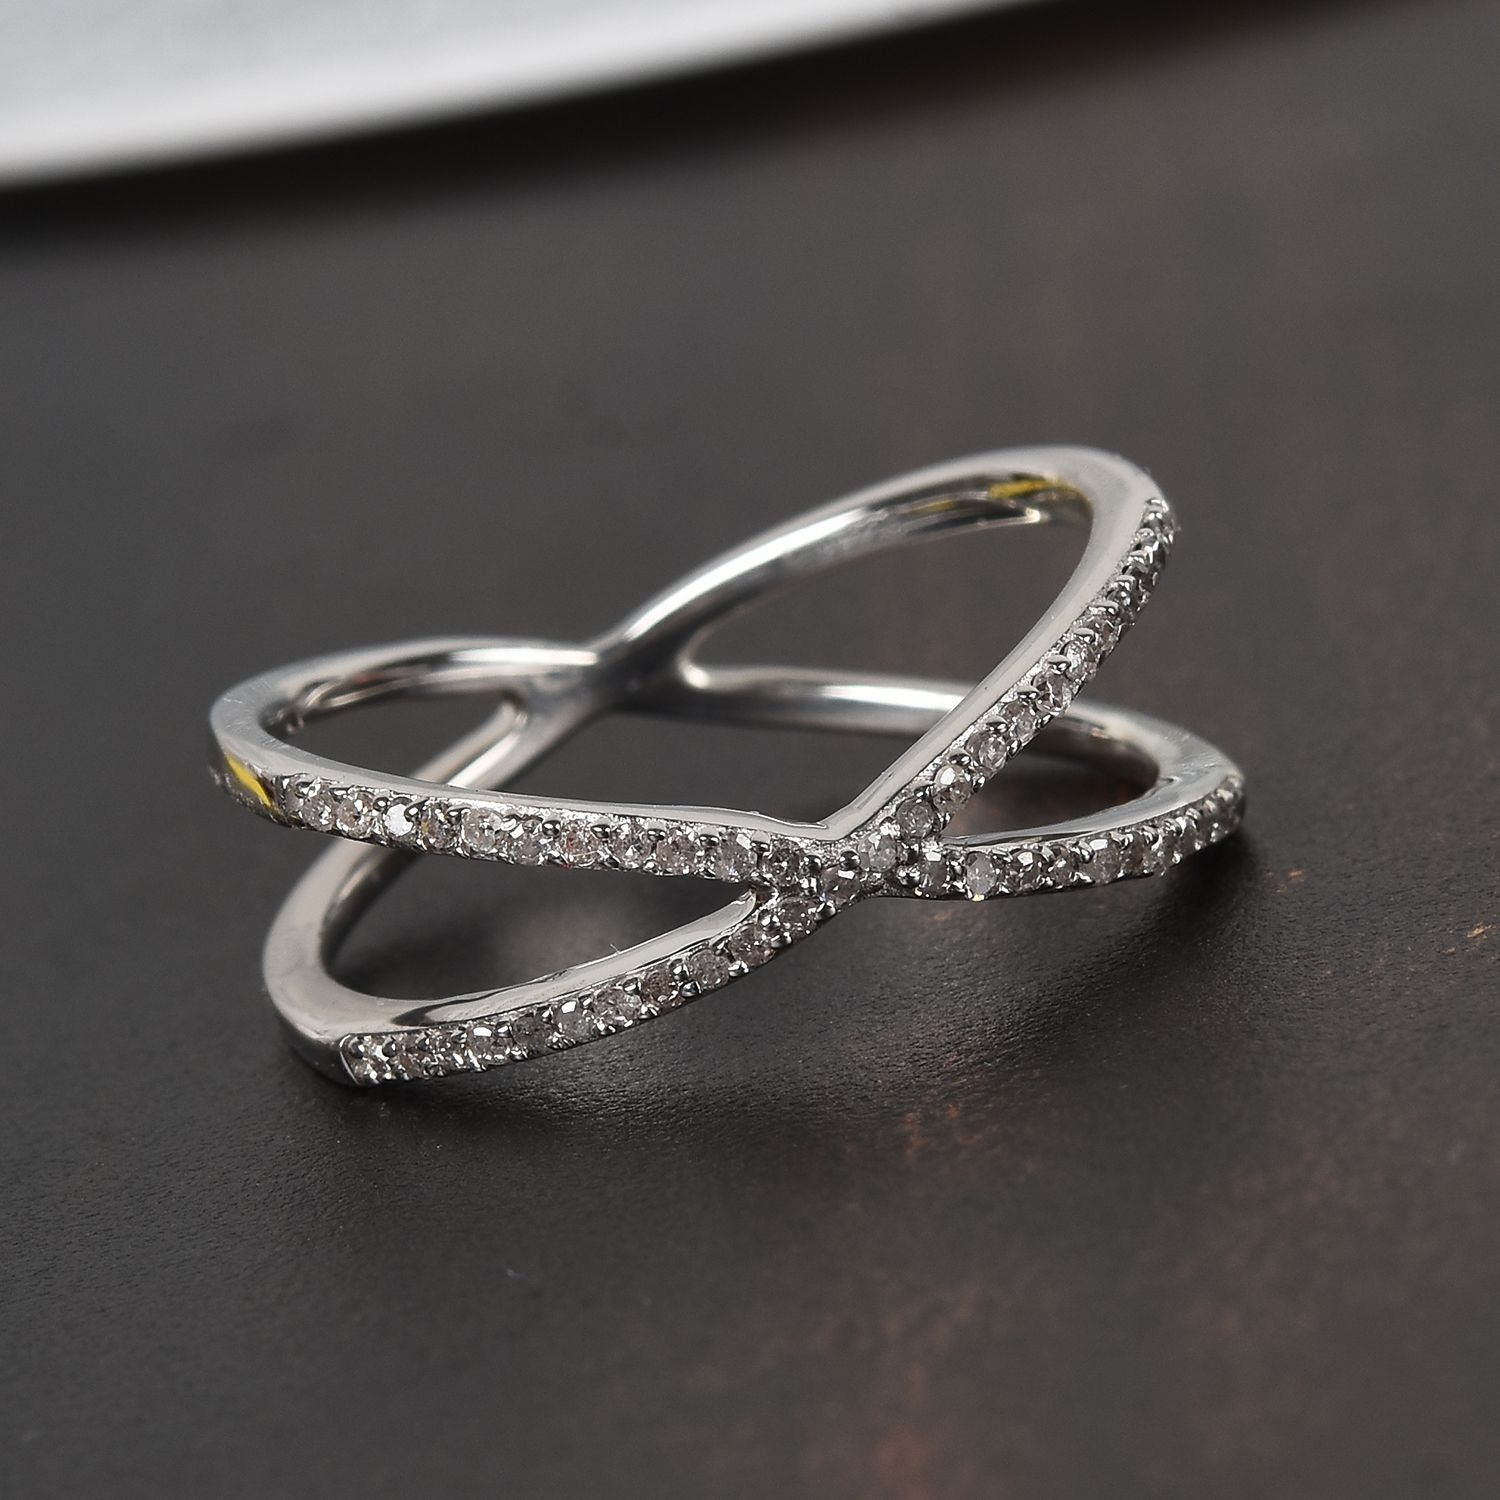 Natural Vintage Diamond Criss Cross Ring In Platinum Over – Etsy Uk In “x” Rings With Diamond Pave (View 5 of 25)